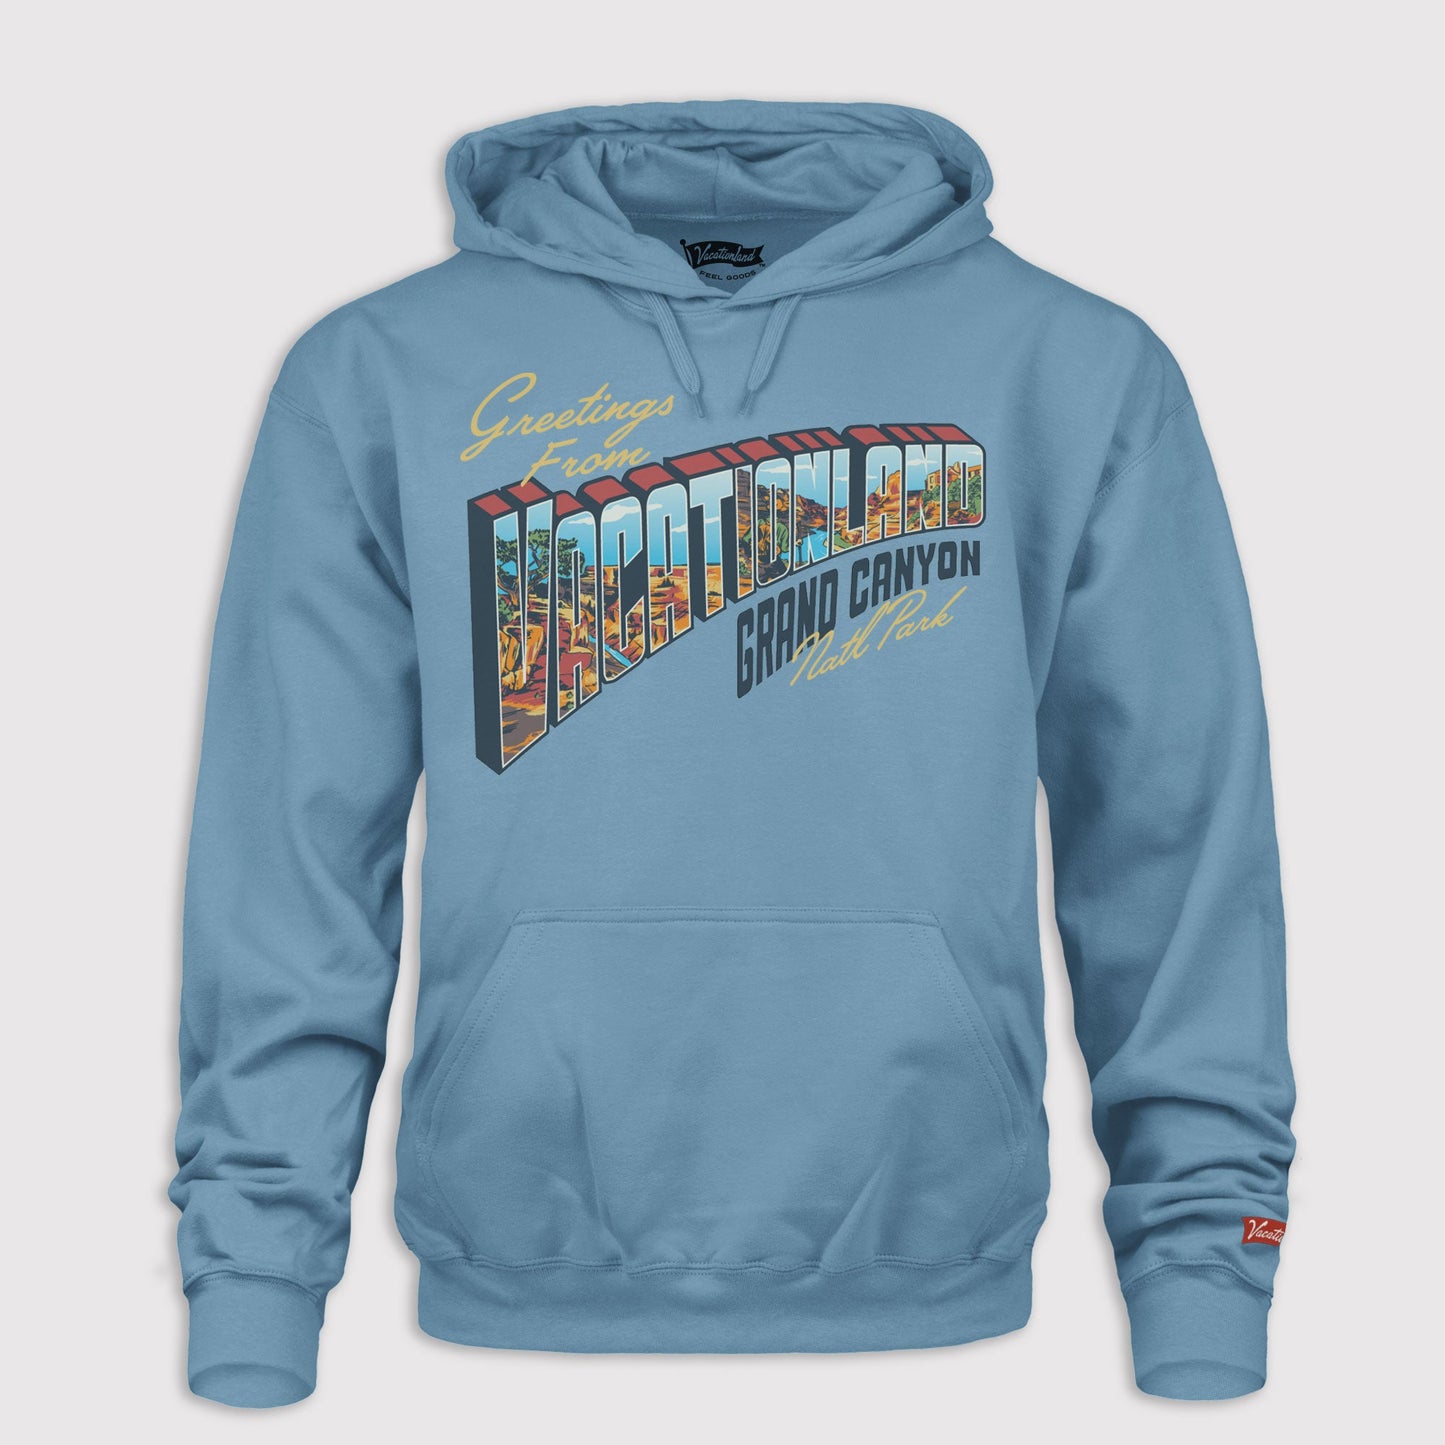 Vignettes Hoodie - Grand Canyon